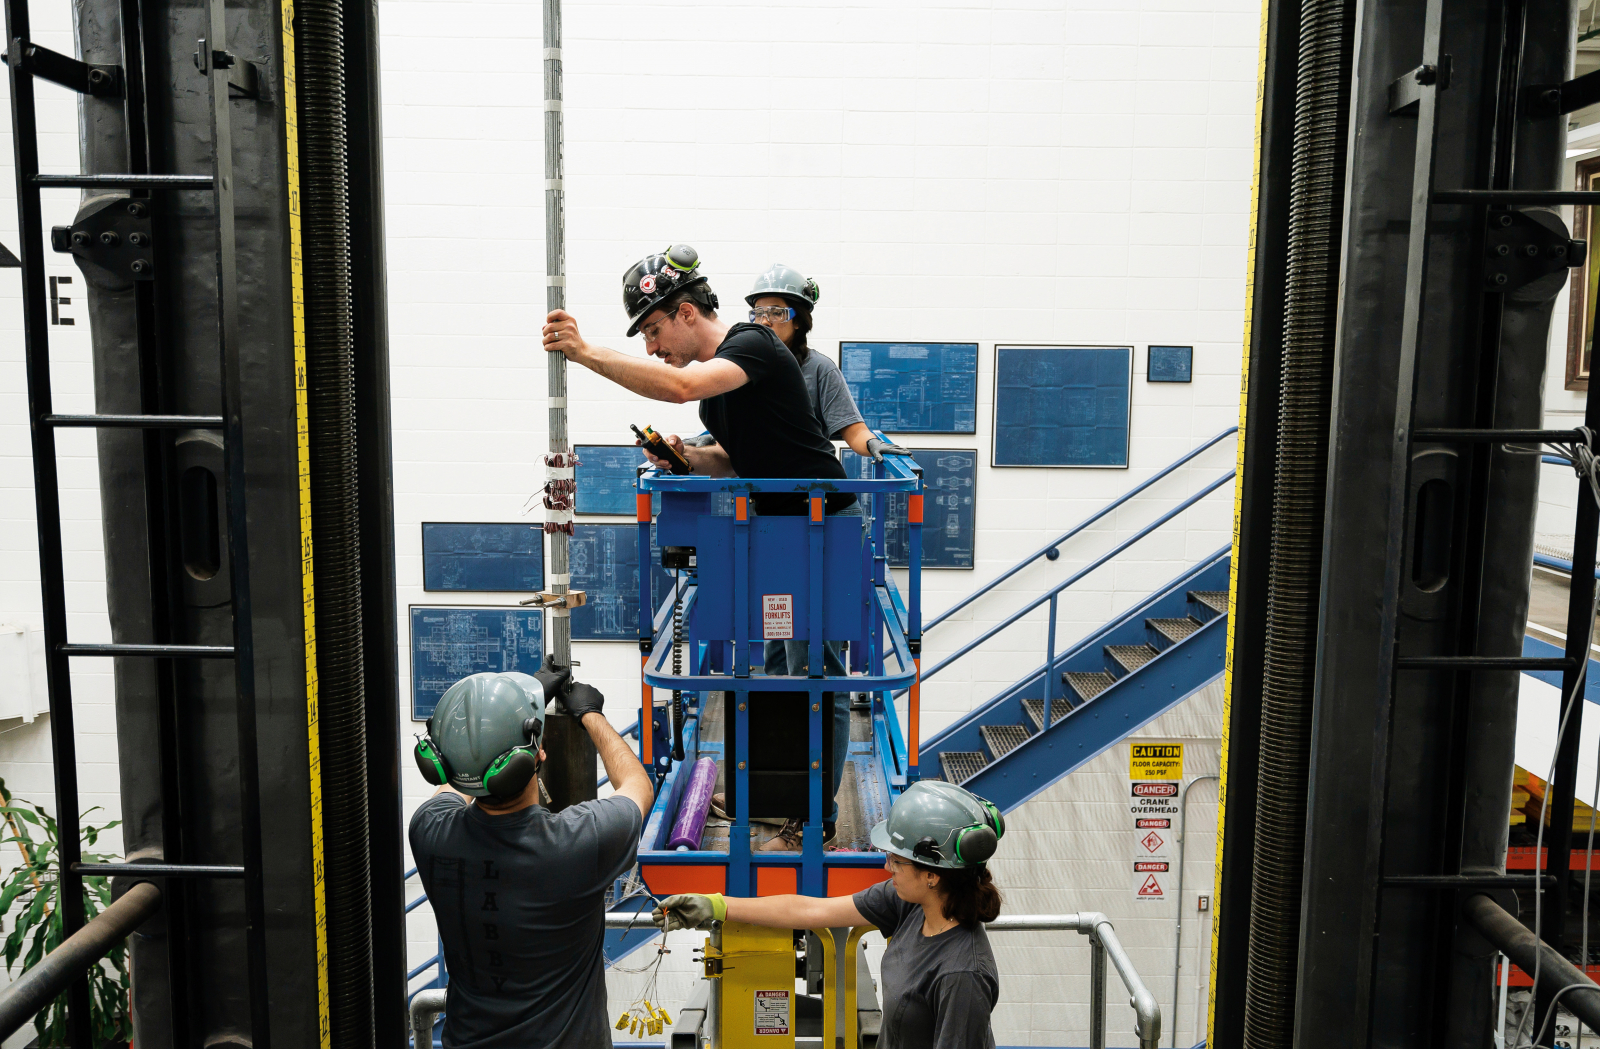 Students work on a metal construction site in a forklift.